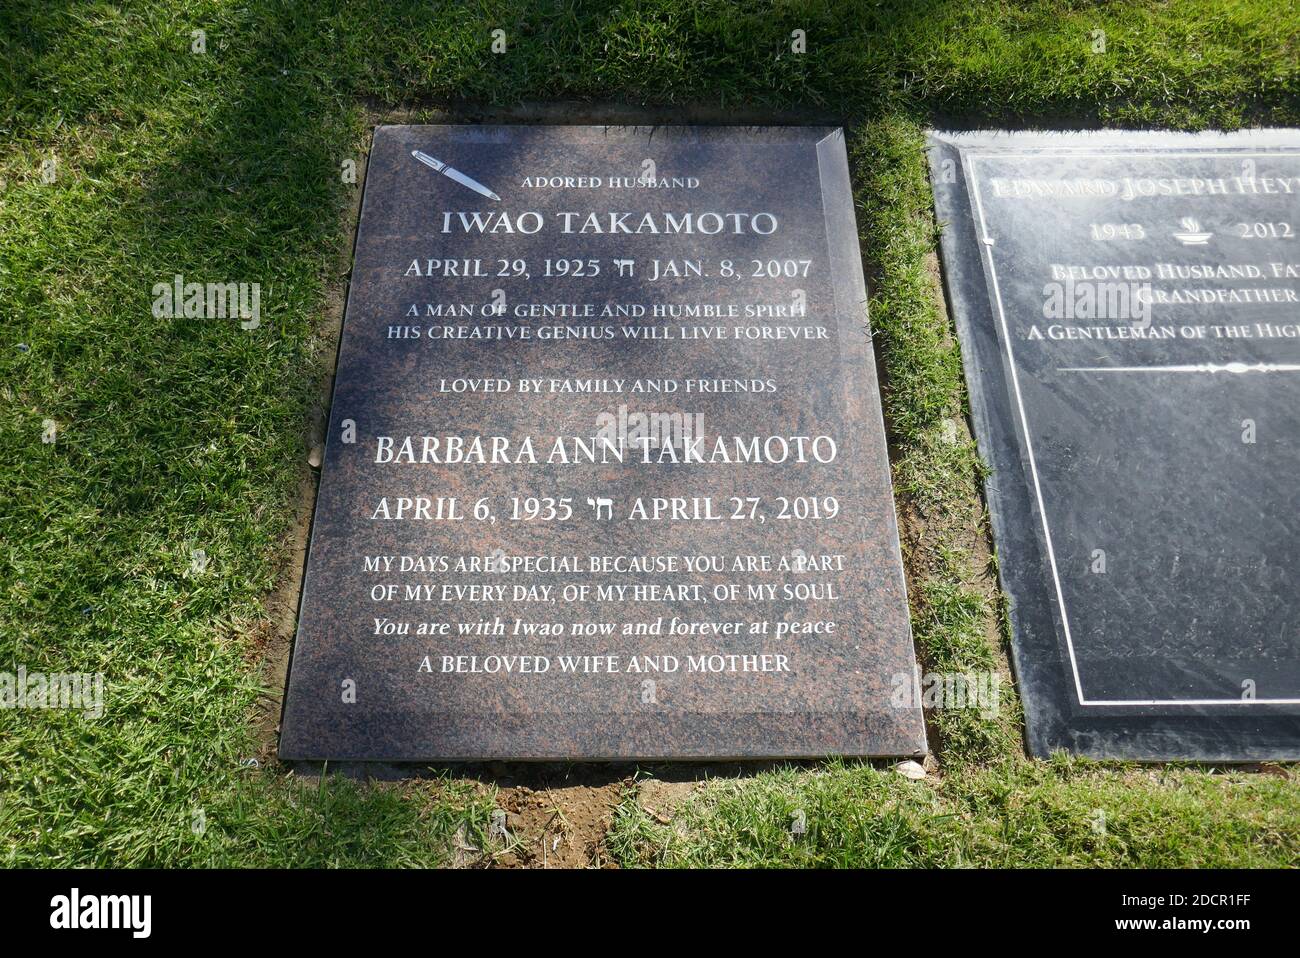 Los Angeles, California, USA 17th November 2020 A general view of atmosphere of animator Iwao Takamoto's Grave at Mount Sinai Cemetery Hollywood Hills on November 17, 2020 in Los Angeles, California, USA. Photo by Barry King/Alamy Stock Photo Stock Photo